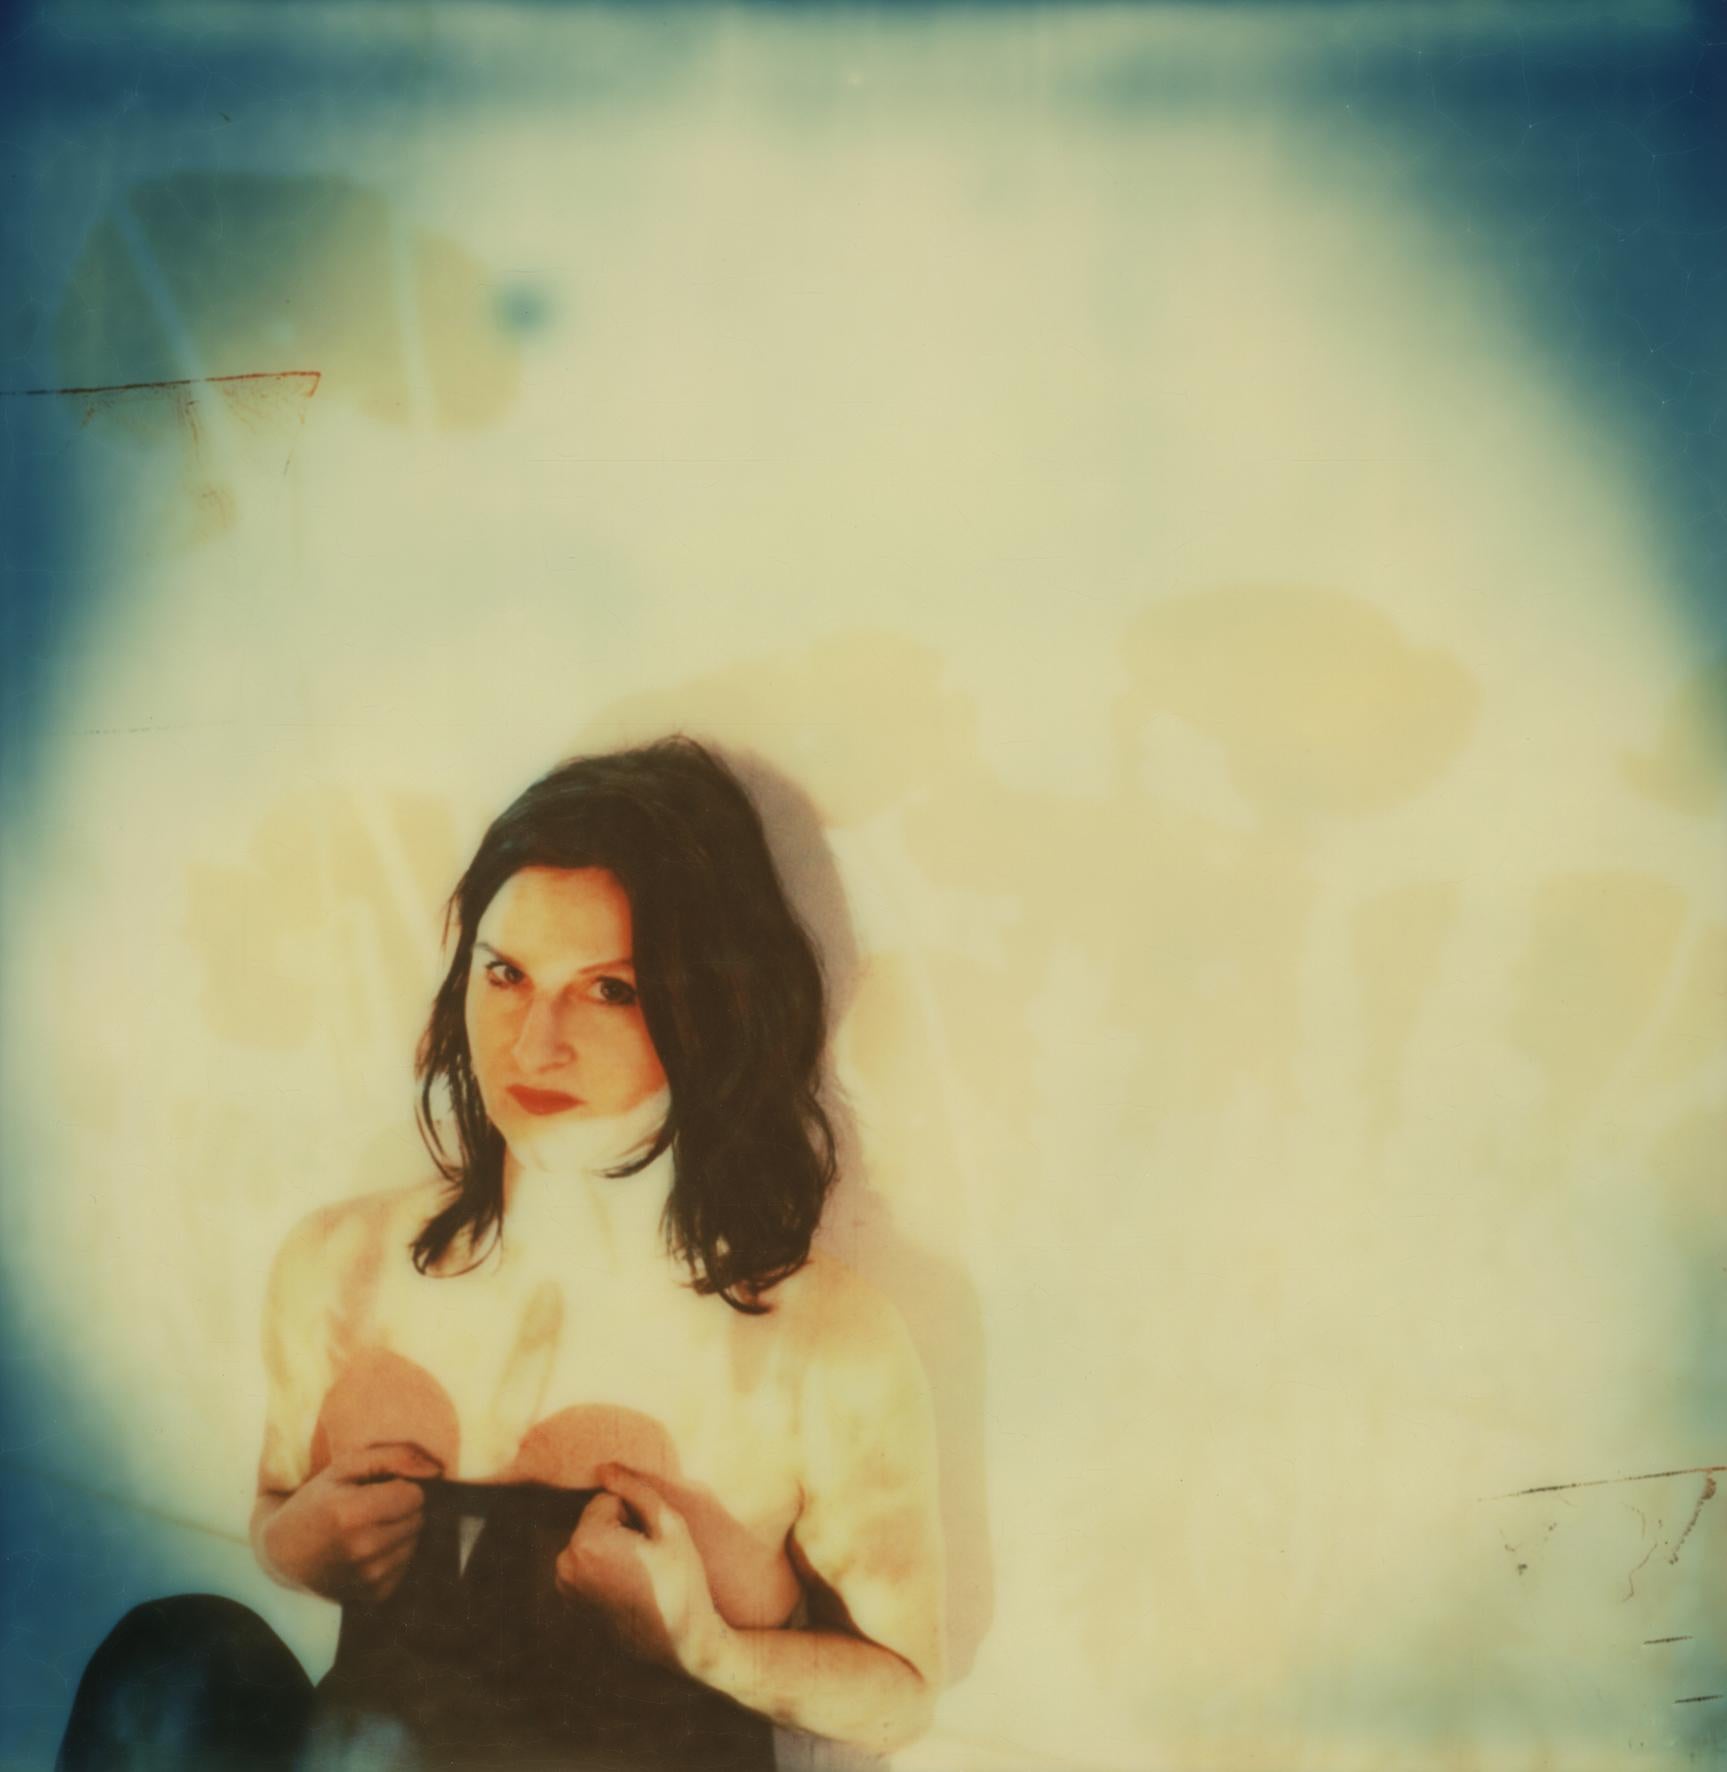 Carmen de Vos Portrait Photograph -  Popped out of nowhere #01 [From the series Need] - Polaroid, Nude, Women, Color